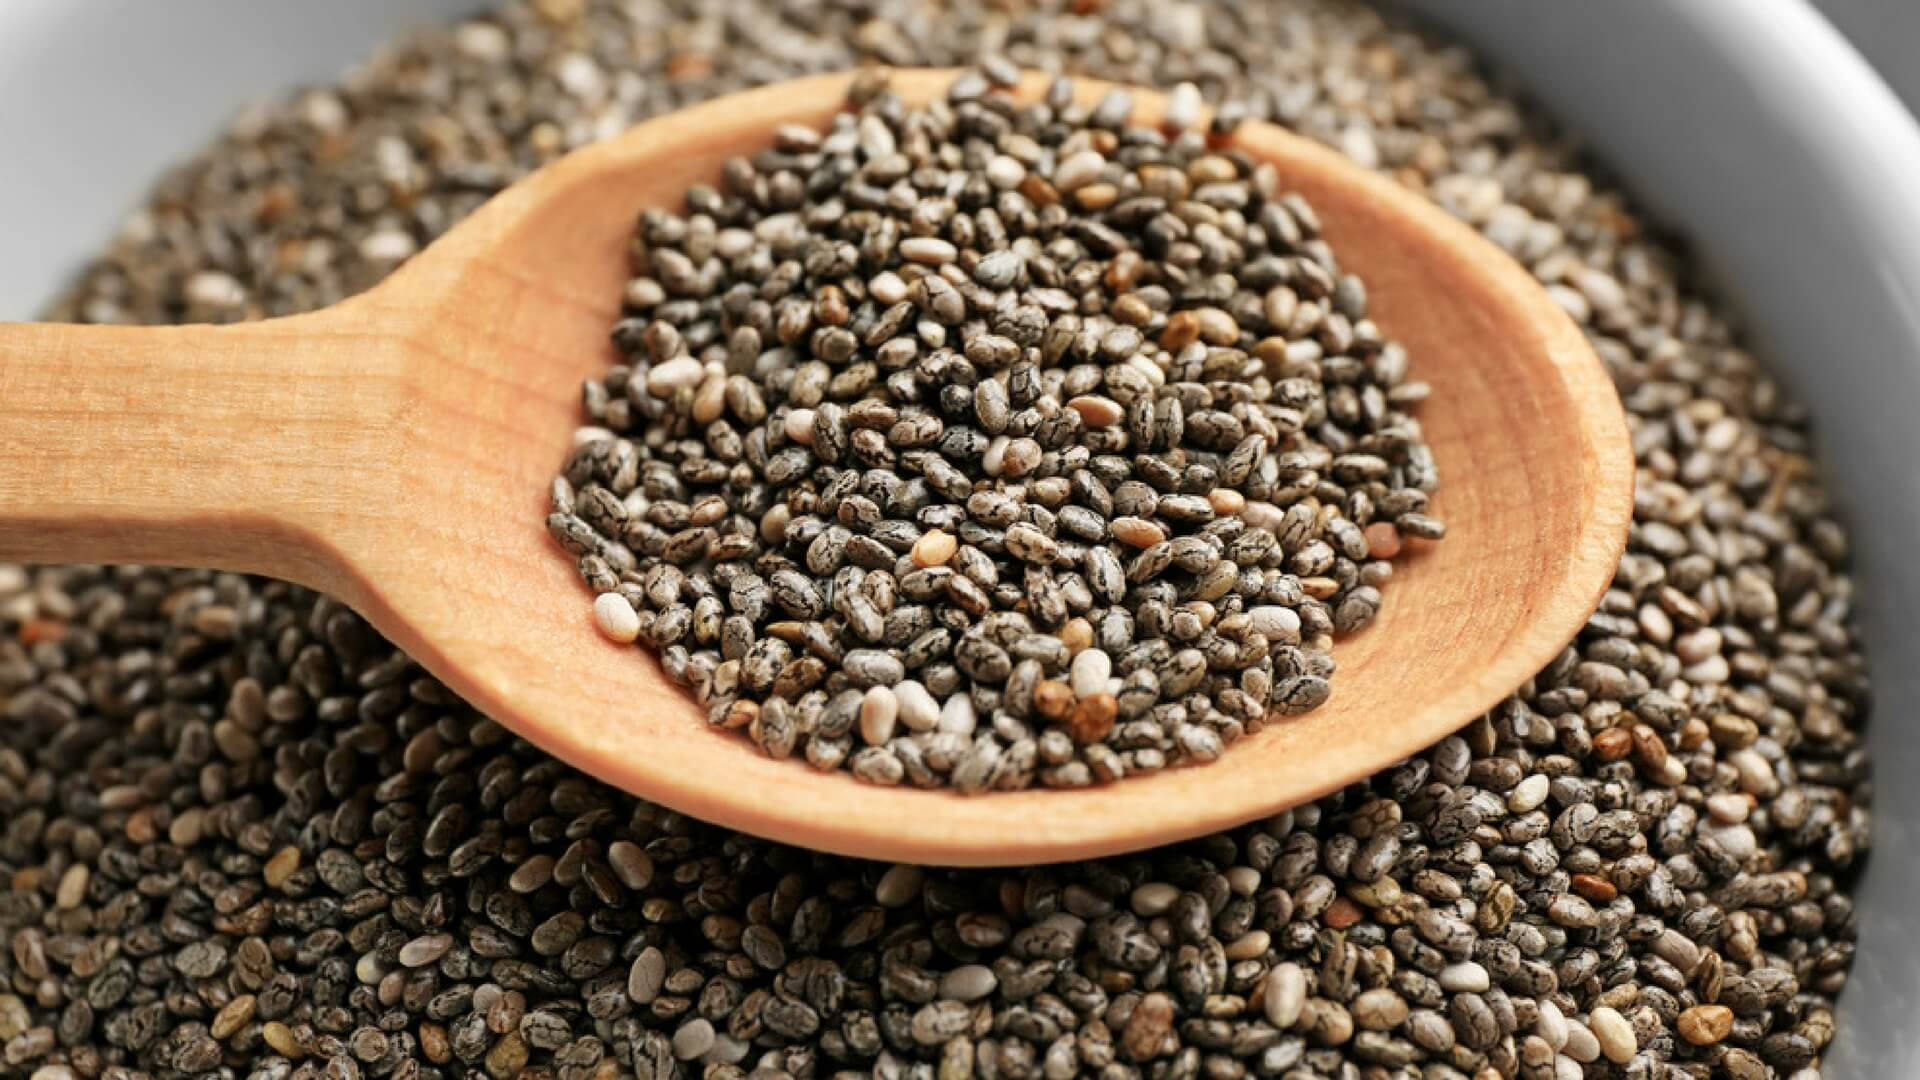 A Wooden Scoop of Nutrient-dense Chia Seeds Wallpaper